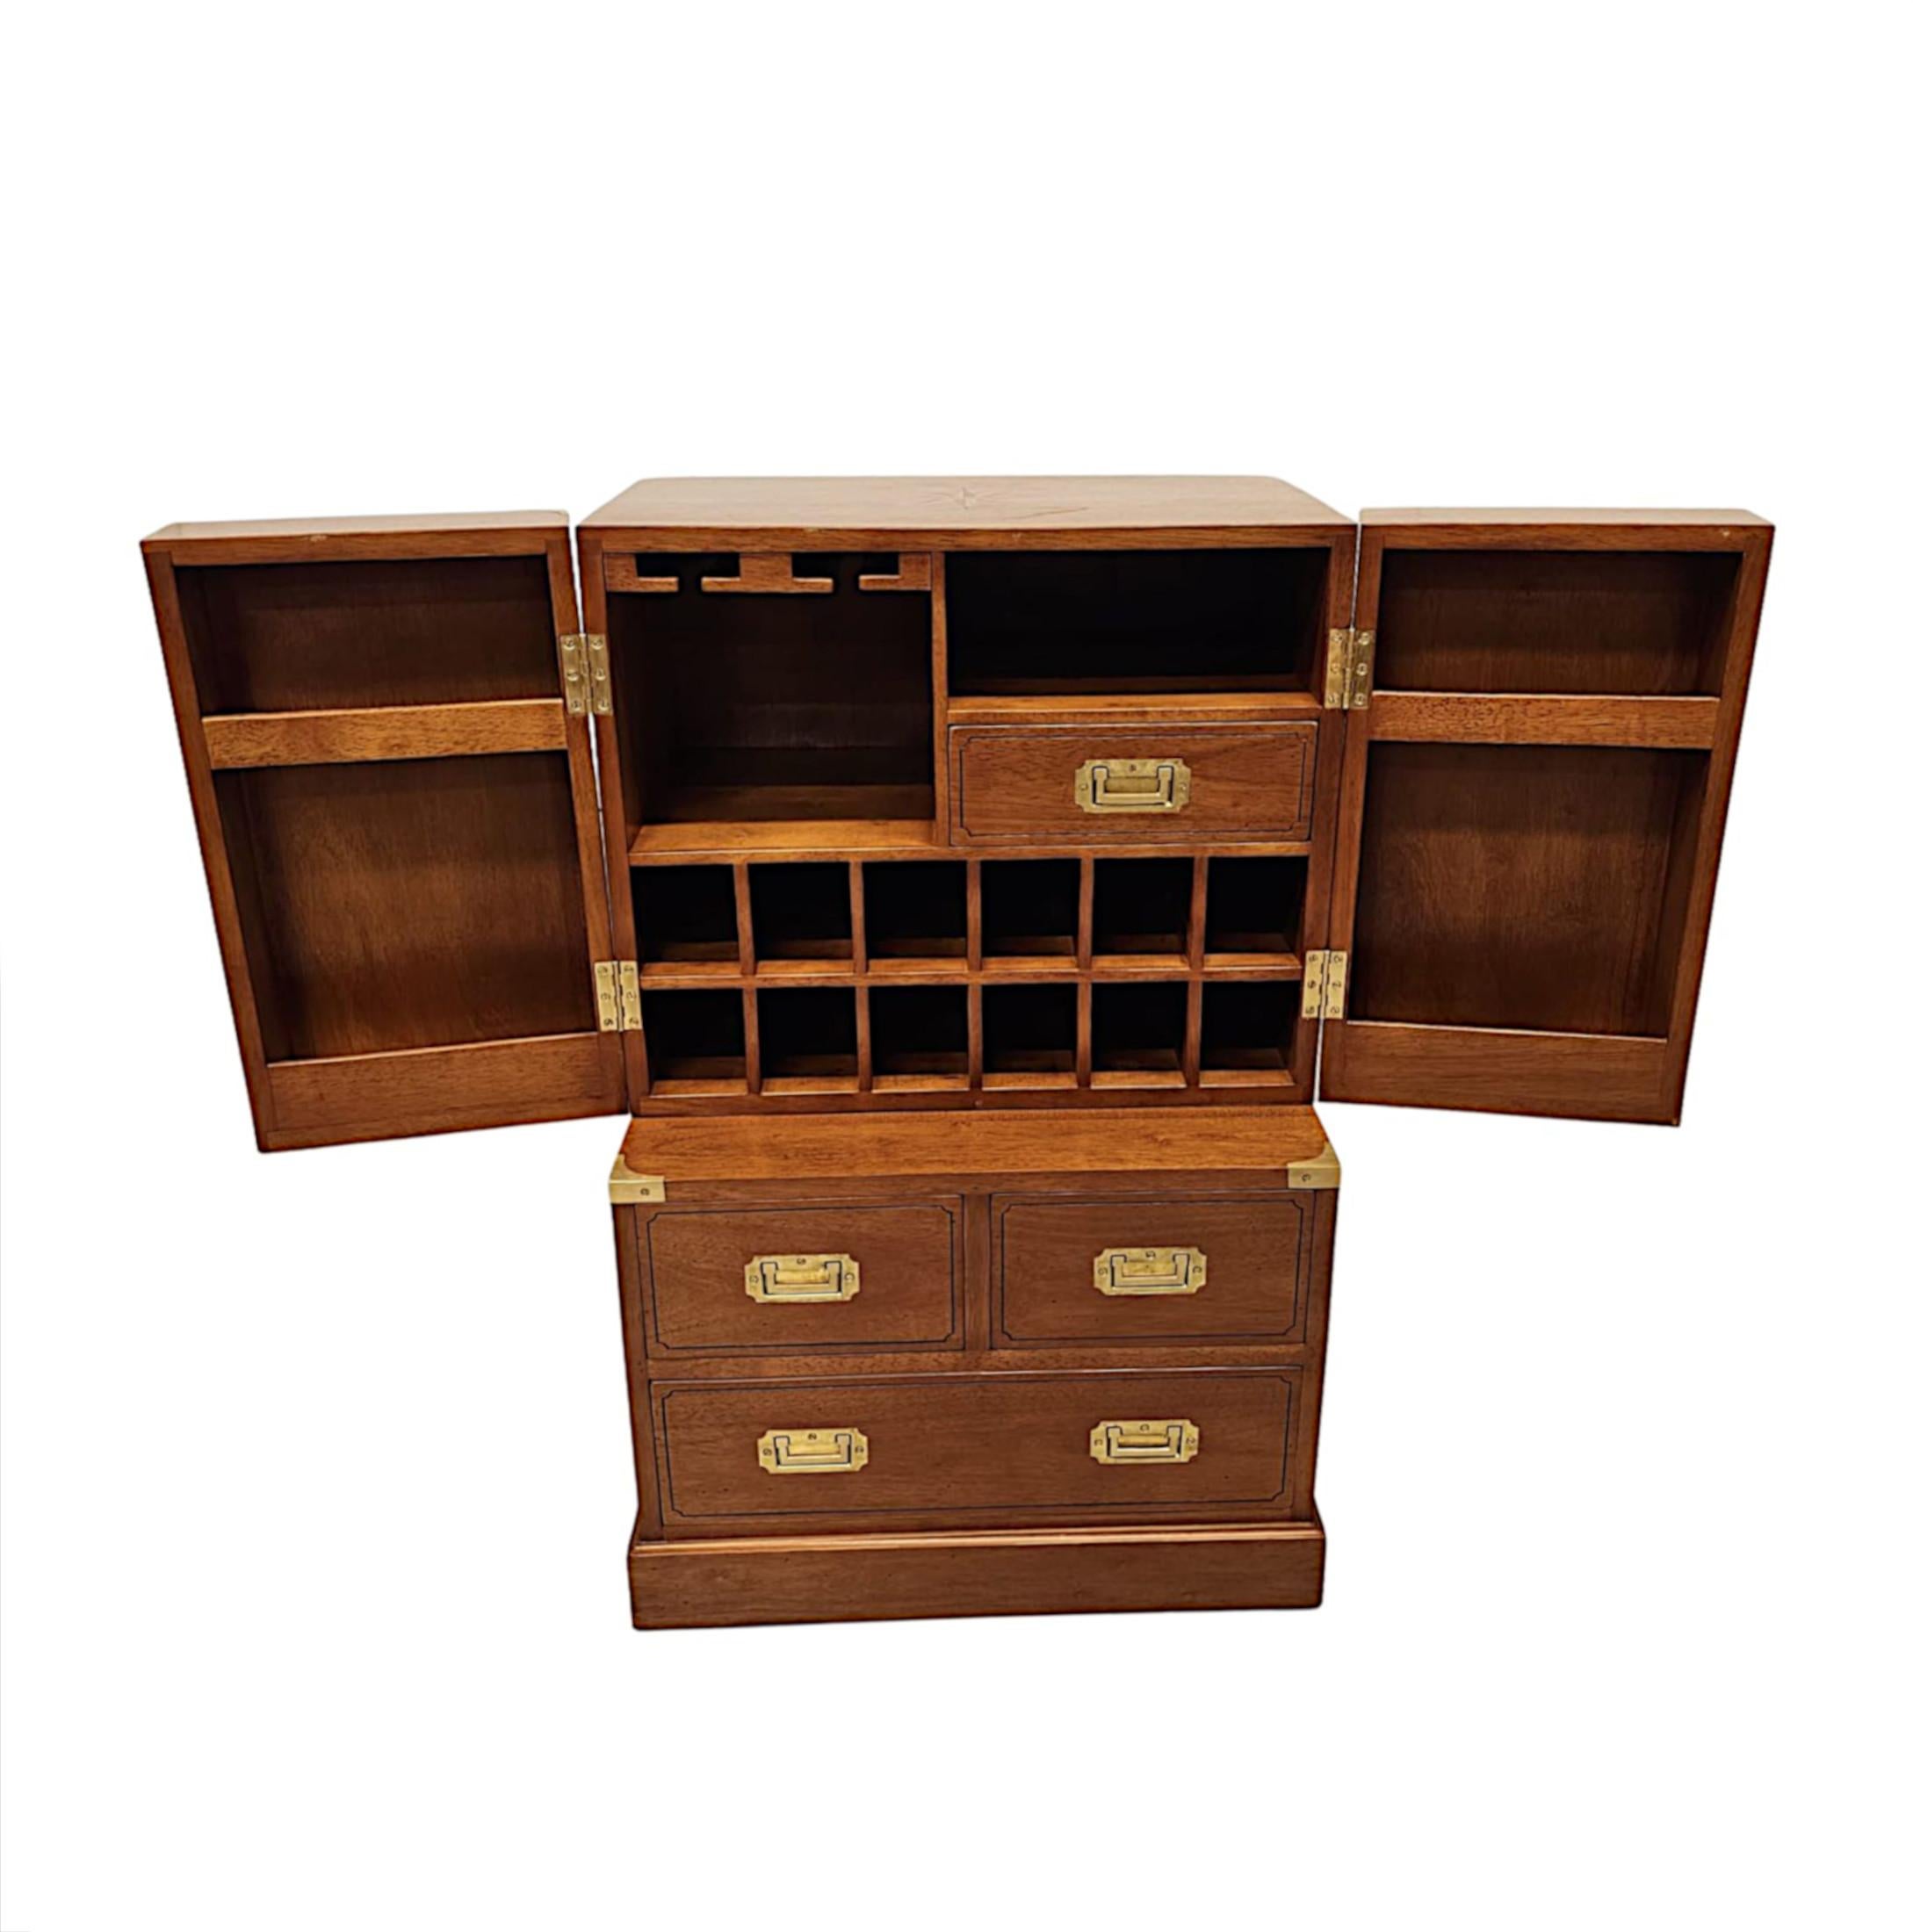 A stunning cherrywood and brass bar cabinet of exceptional quality, richly patinated and beautifully hand made with finely cast brass mounts throughout.  The well figured moulded top of the upper section with gorgeous marquetry inlaid star motif